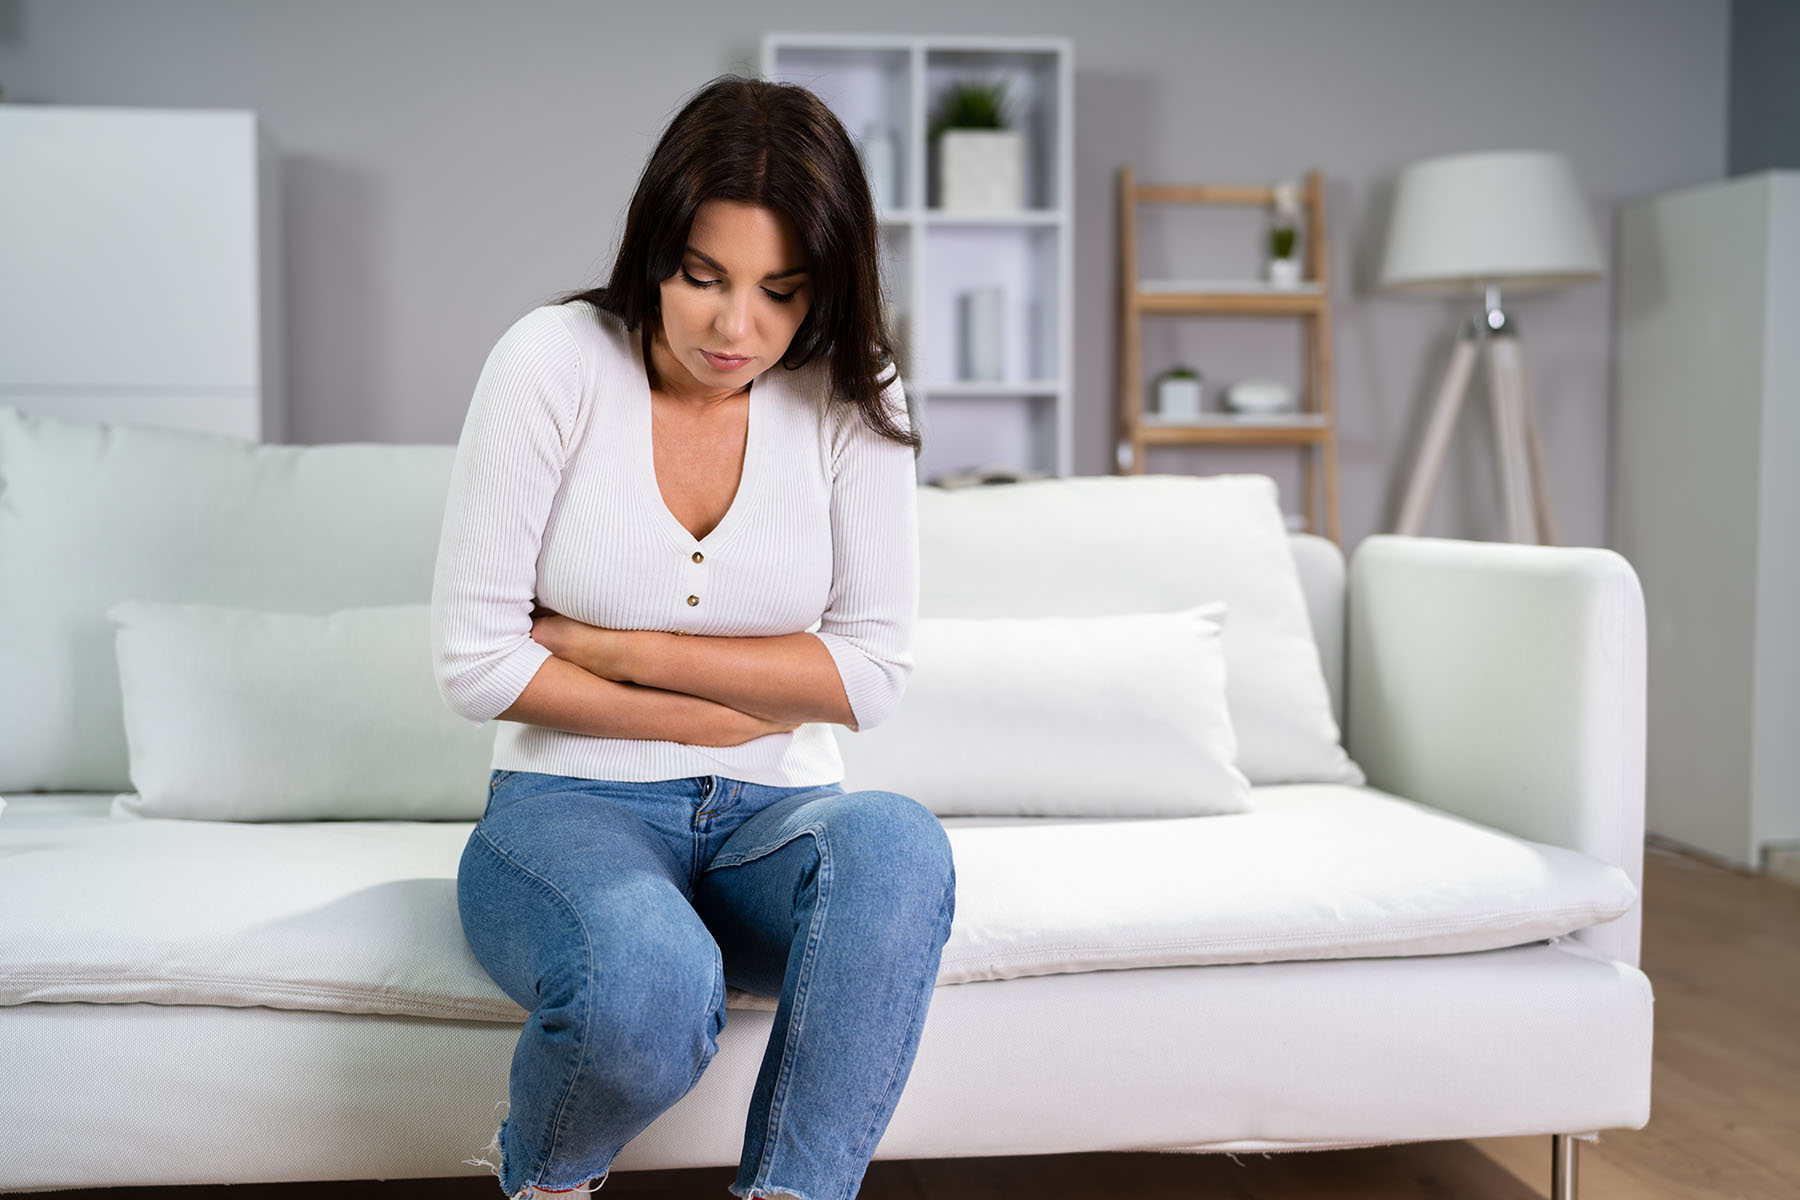 Woman in white shirt sits on couch holding her stomach.